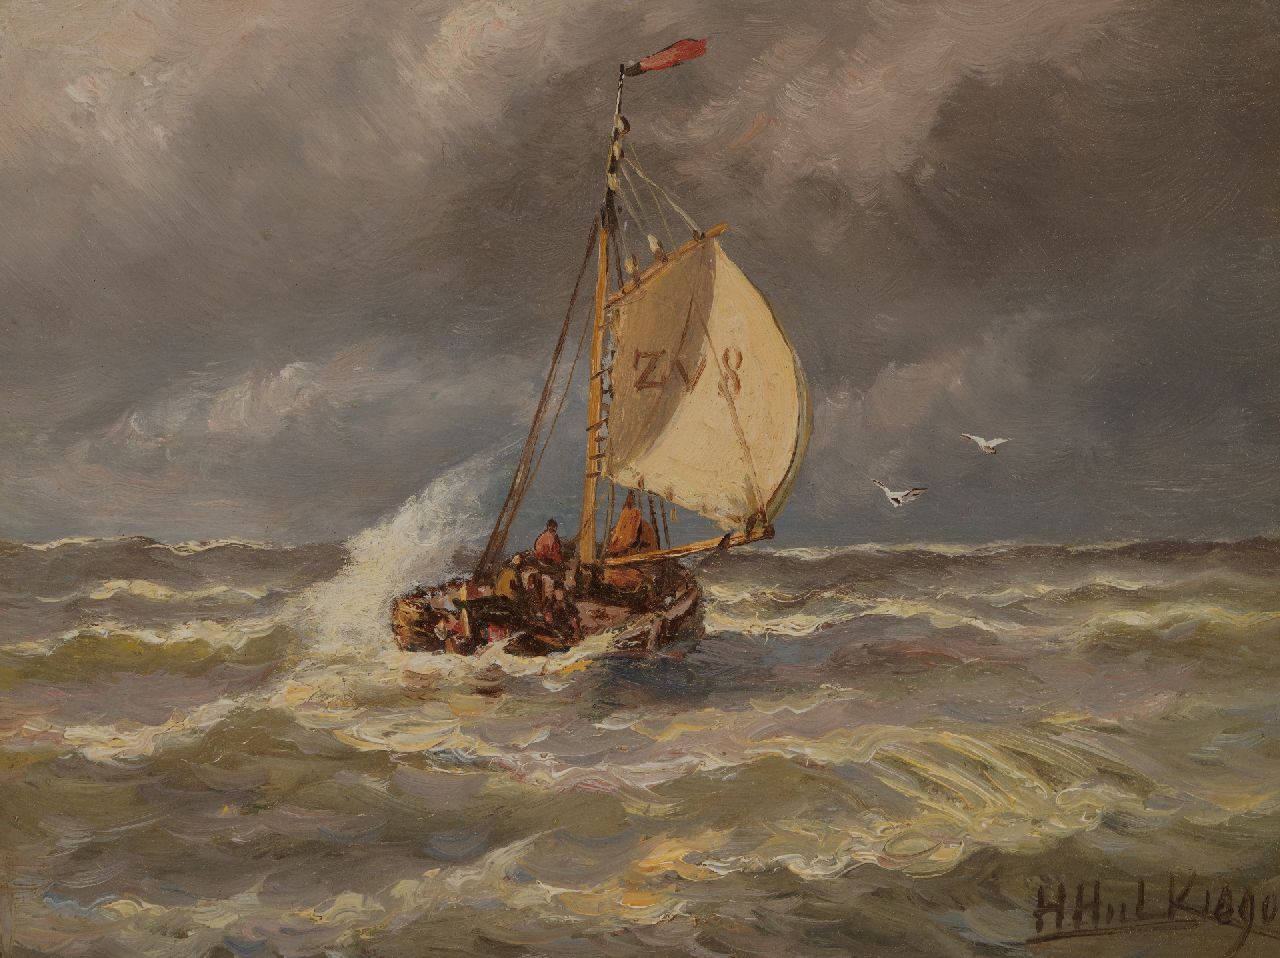 Hendrik Hulk | Sailing ship on rough sea, oil on panel, 16.3 x 21.3 cm, signed l.r. and dated 1890